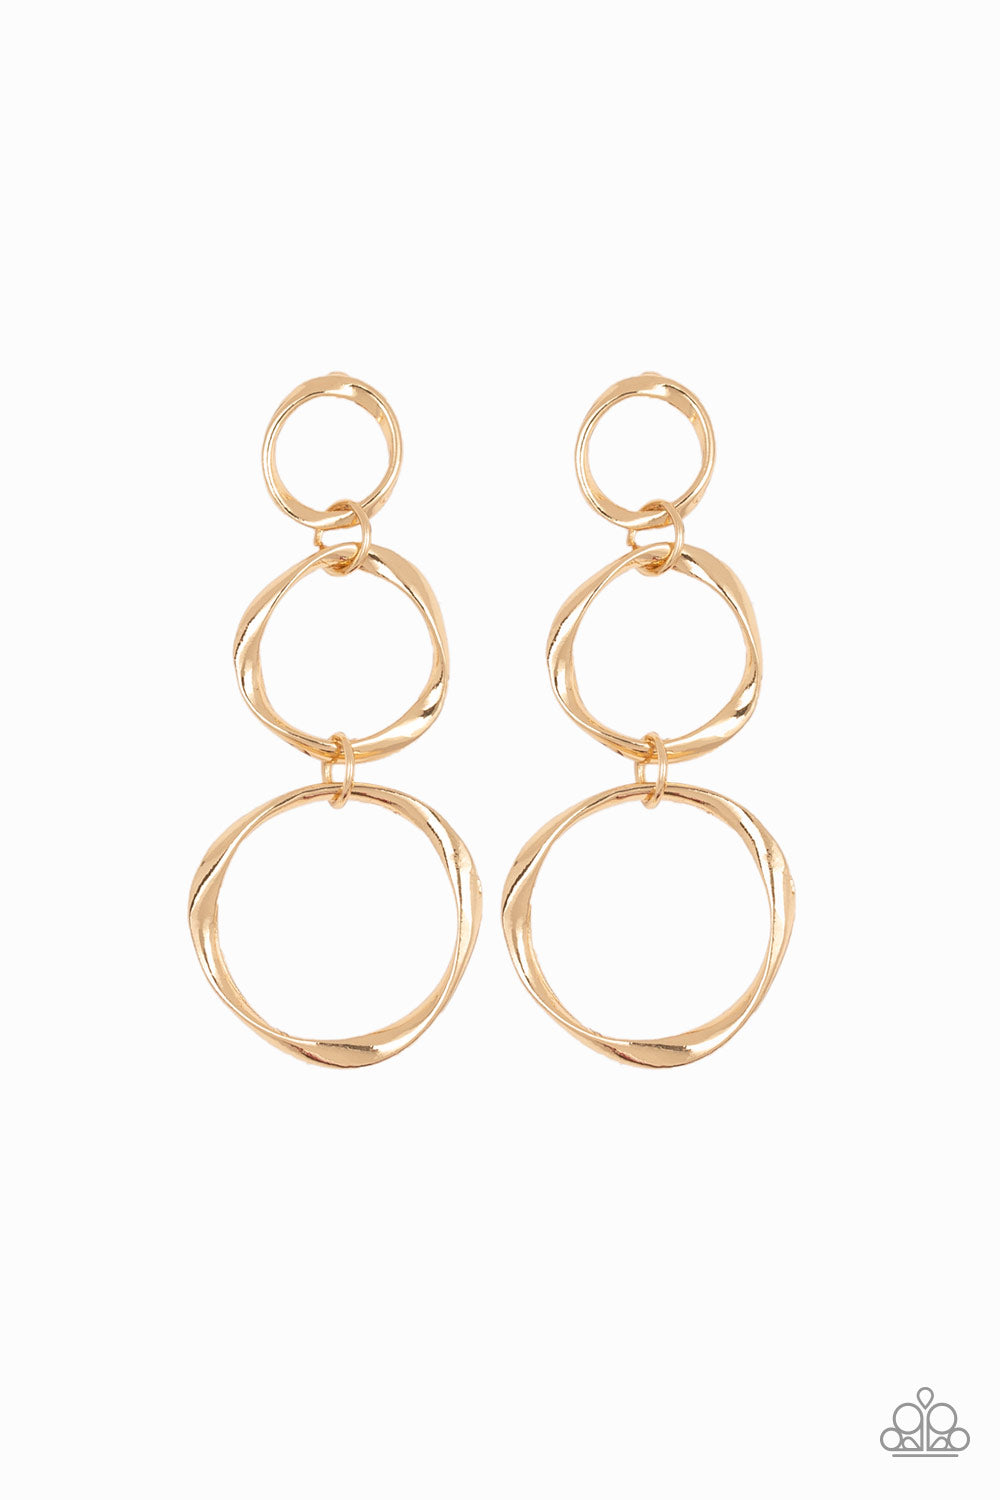 Three Ring Radiance Earring (Copper, Gold)